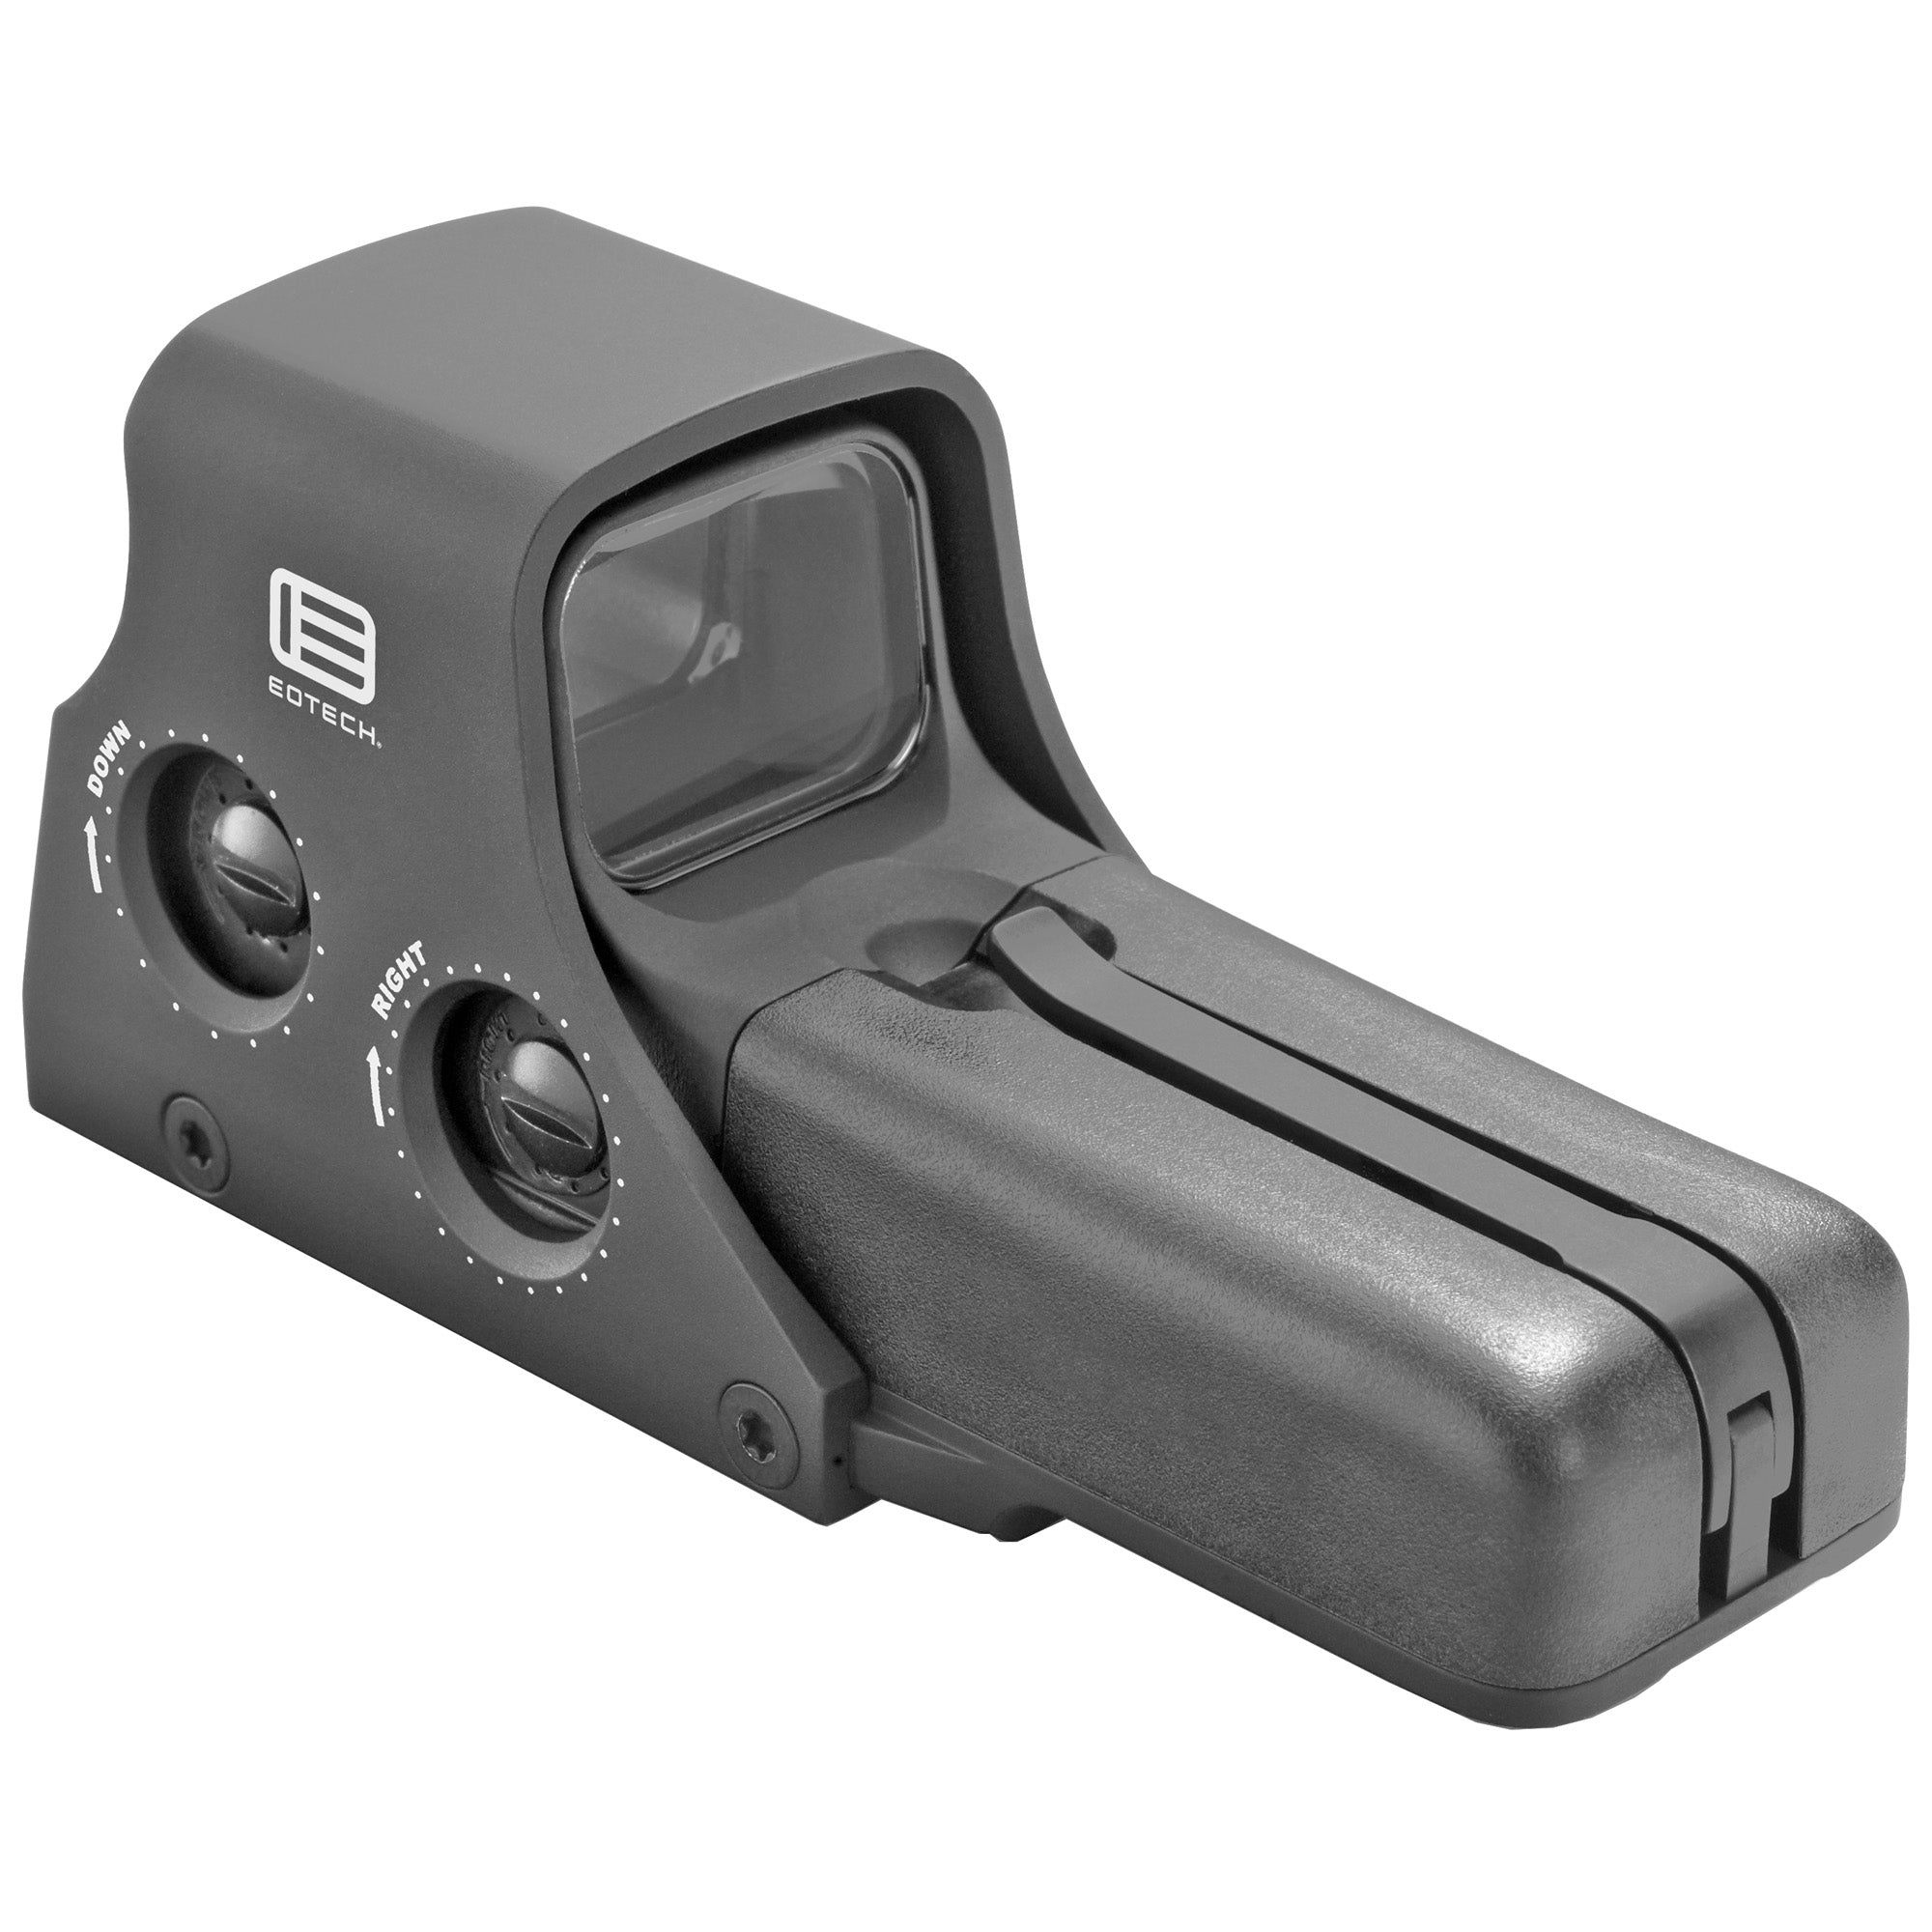 EOTech 512 Holographic Sight with red 68 MOA ring and 1-MOA dot reticle, mounted on a firearm, featuring rear button controls and black finish.